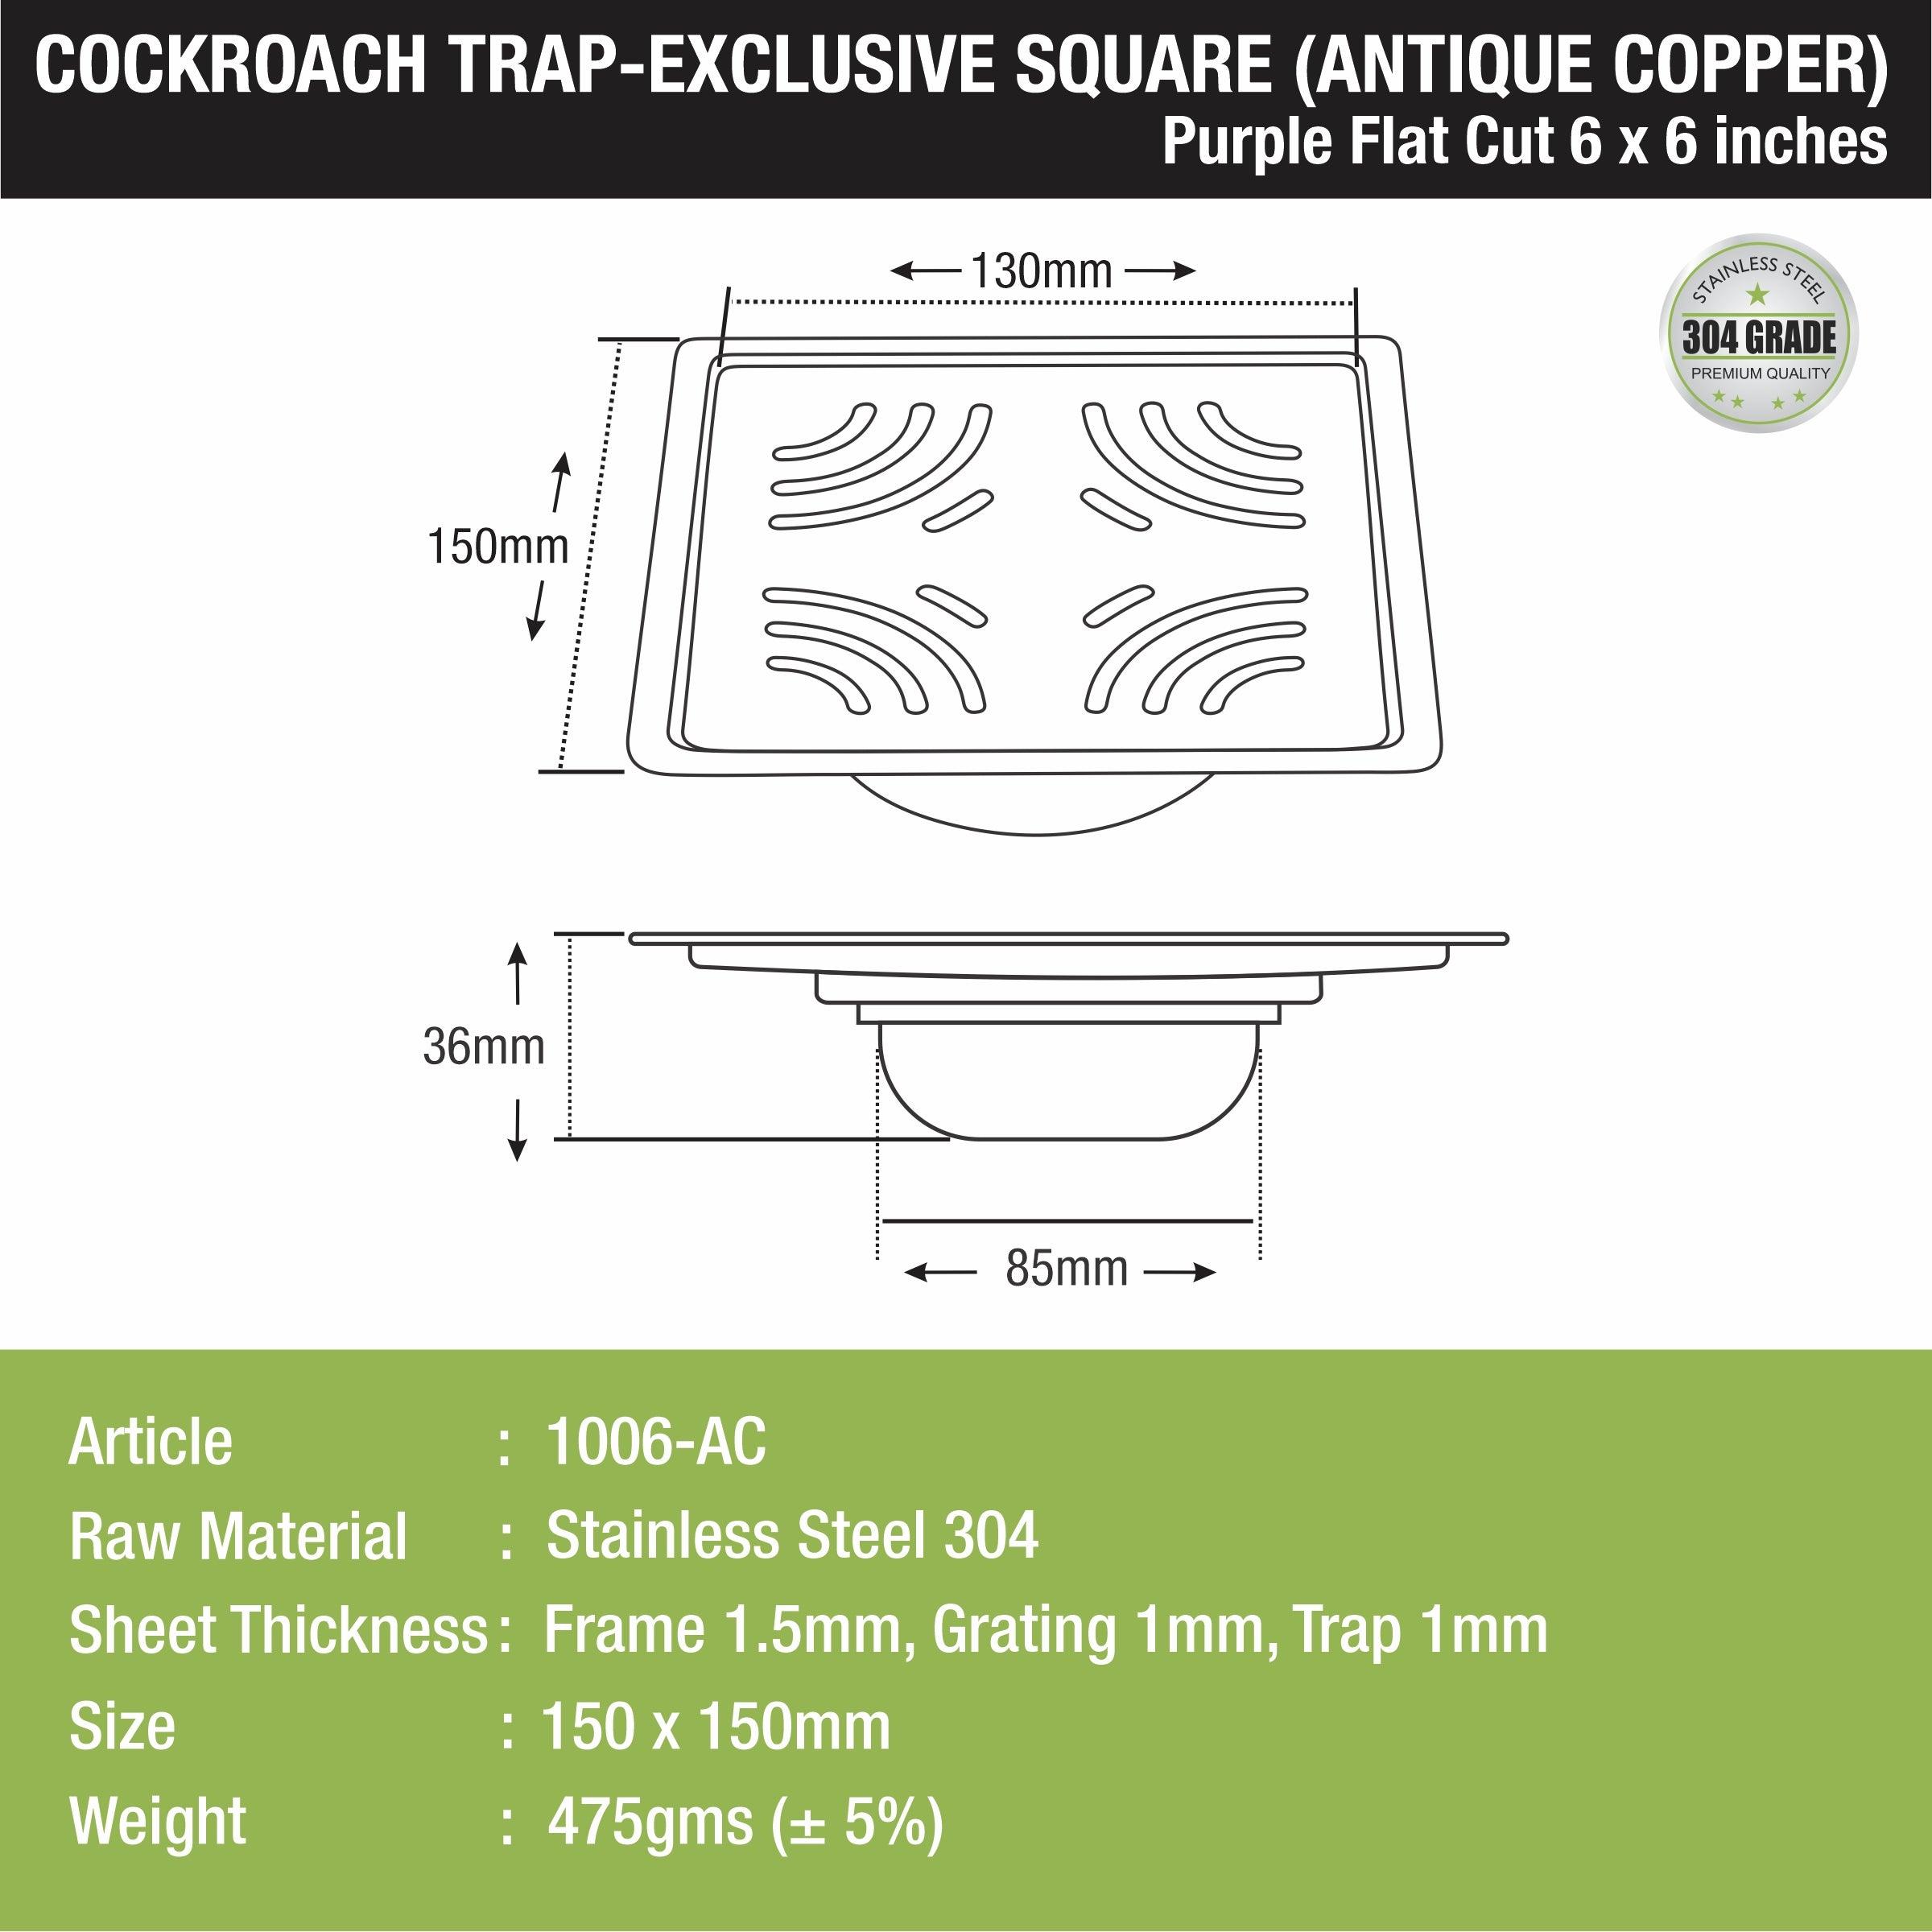 Purple Exclusive Square Flat Cut Floor Drain in Antique Copper PVD Coating (6 x 6 Inches) with Cockroach Trap sizes and dimensions